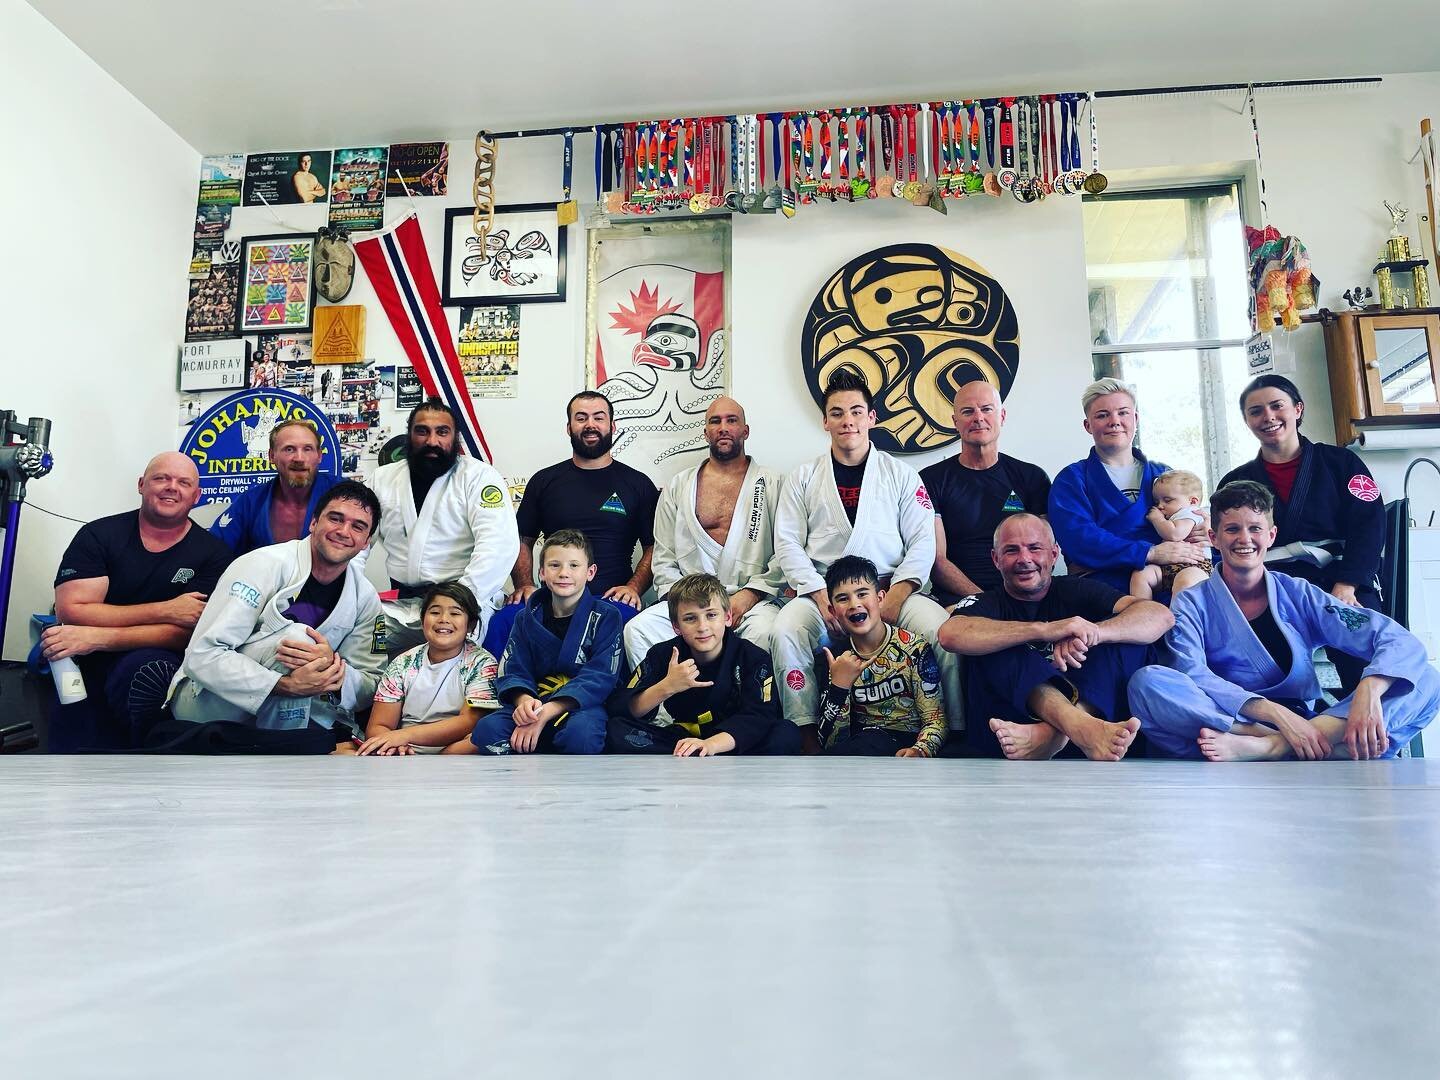 Amazing turnout for open mat today!❤️🤙🏼
Big thanks to @bkahlon from @blackrockmartialarts Parksville, Izak from @trashpandagrapplingclub Port Alberni and the gang from @pure_martial_arts for joining us today!
.
#bjjcommunity